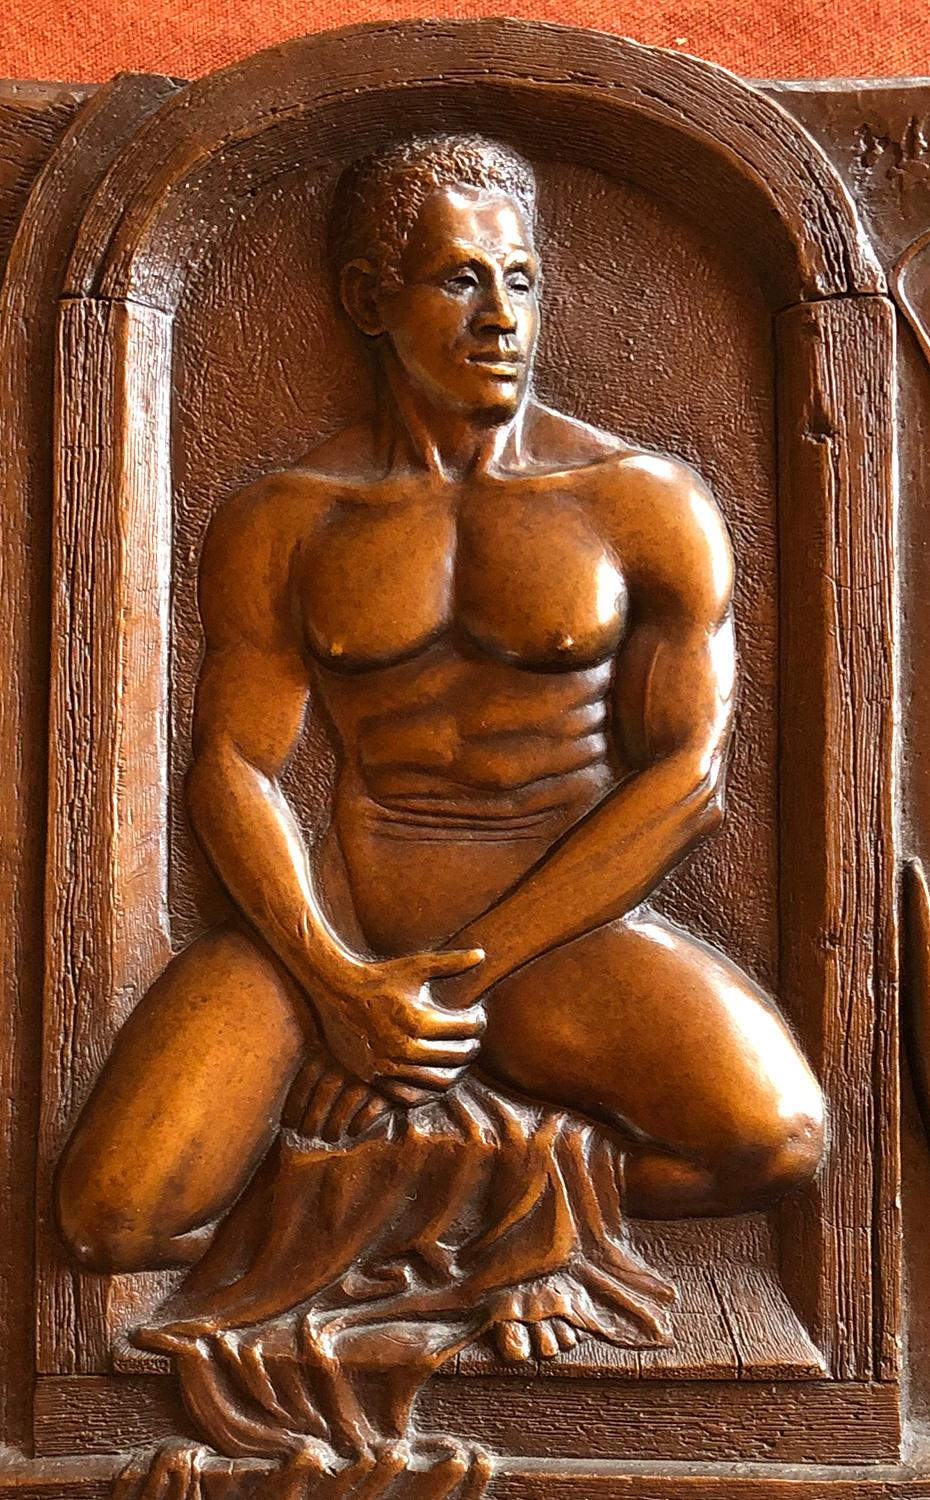 Model, bronze nude by Charles Stinson 1